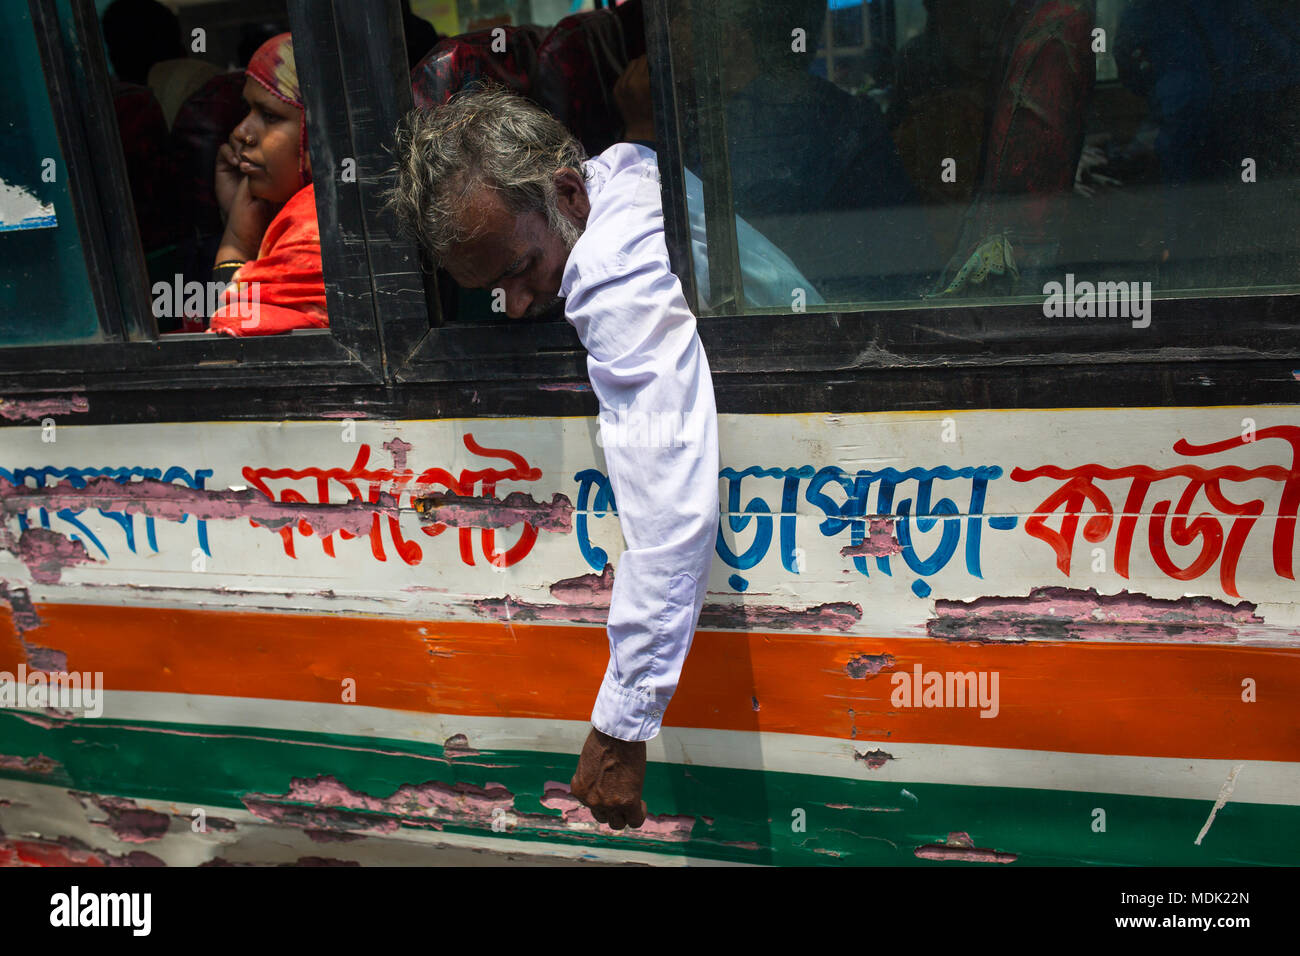 Dhaka, Bangladesh. 19th Apr, 2018. A passenger keep his hand outside a running bus on a busy street in Dhaka, Bangladesh on April 19, 2018.  At least 4,284 people, including 516 women and 539 children, were killed and 9,112 others injured in 3,472 road accidents across Bangladesh in 2017. Road accident   On 3 April,2018 Rajib, 21, a second-year undergraduate student of Titumir College in the capital’s Mohakhali area, was travelling on a double decker BRTC bus in Karwan Bazar. Credit: zakir hossain chowdhury zakir/Alamy Live News Stock Photo